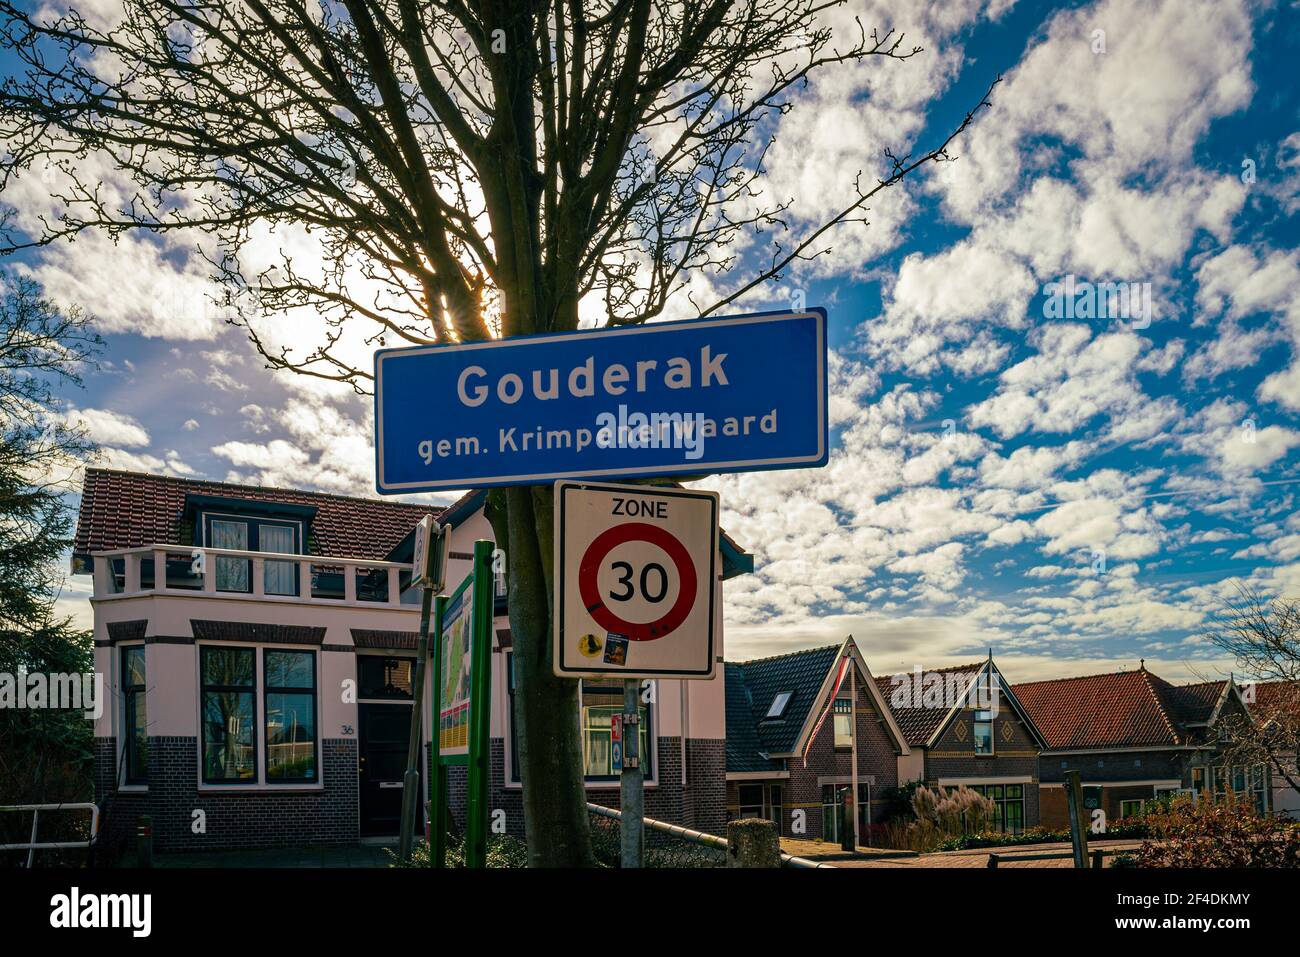 Place name sign of the village of Gouderak, Holland Stock Photo